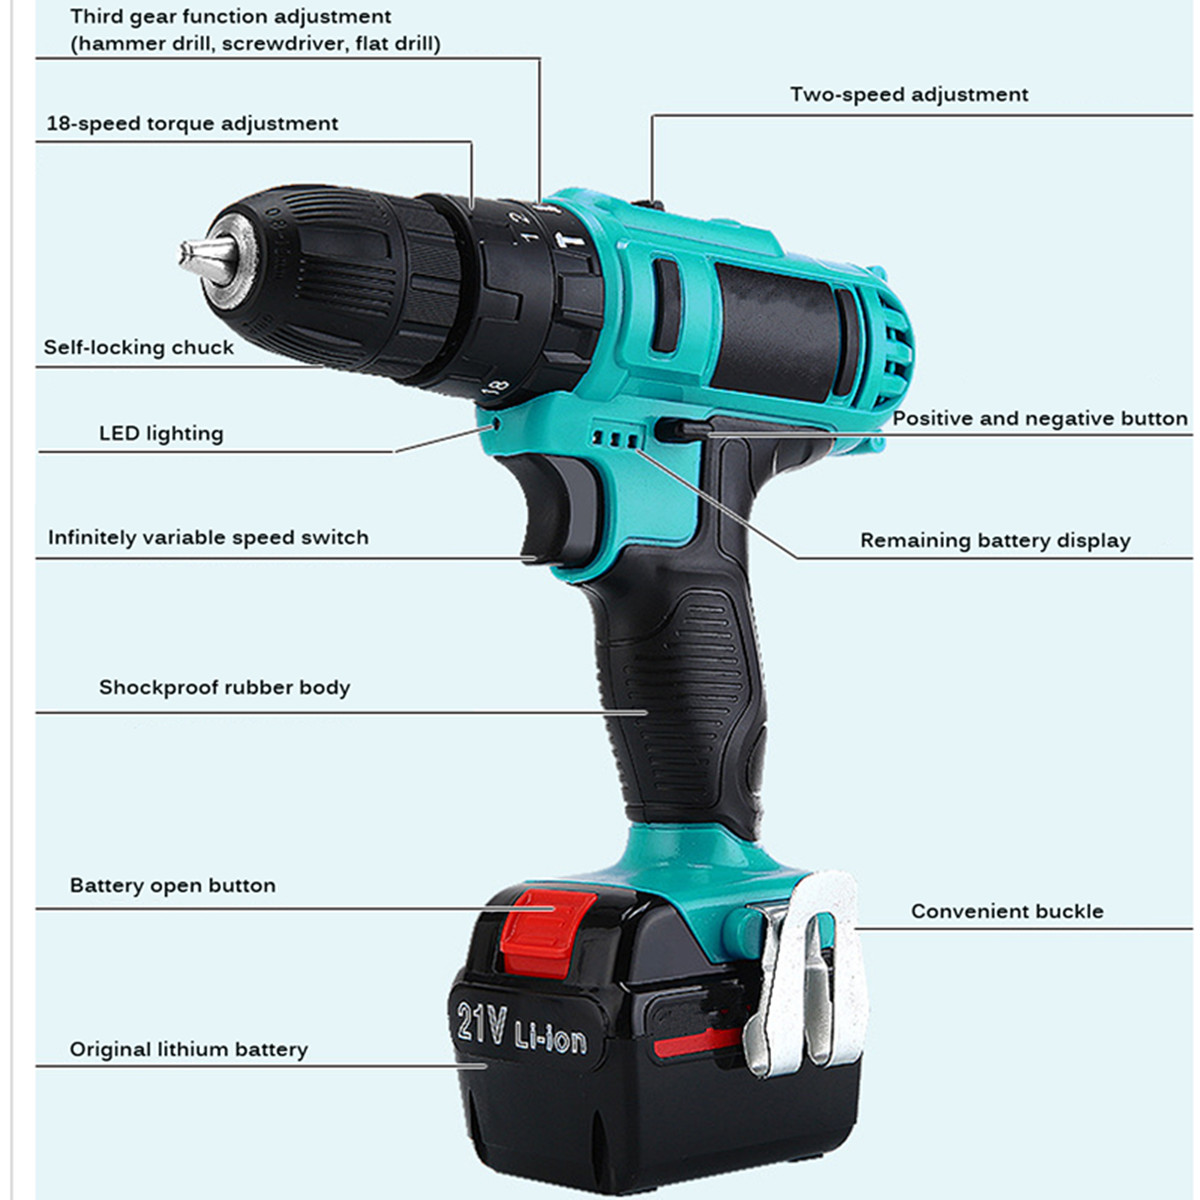 21V-Cordless-Impact-Power-Drill-Electric-Screwdriver-Set-with-2-Li-ion-Batteries-1372018-4